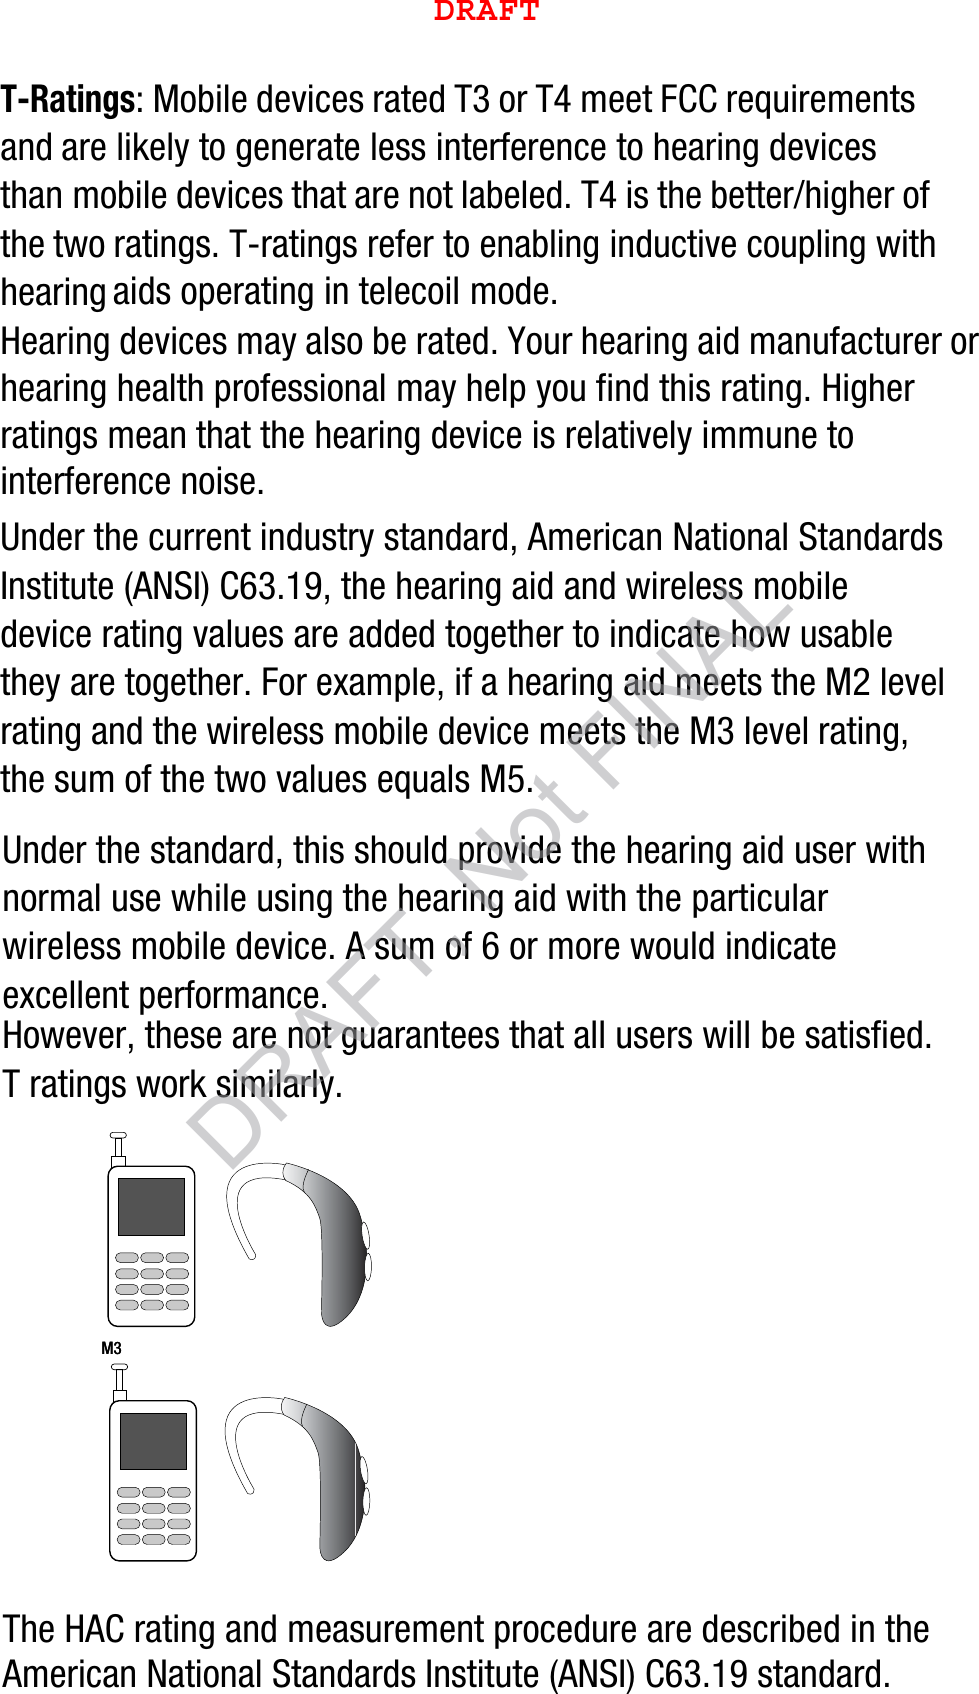 T-Ratings: Mobile devices rated T3 or T4 meet FCC requirements and are likely to generate less interference to hearing devices than mobile devices that are not labeled. T4 is the better/higher of the two ratings. T-ratings refer to enabling inductive coupling with hearing aids operating in telecoil mode.Hearing devices may also be rated. Your hearing aid manufacturer or hearing health professional may help you find this rating. Higher ratings mean that the hearing device is relatively immune to interference noise. Under the current industry standard, American National Standards Institute (ANSI) C63.19, the hearing aid and wireless mobile device rating values are added together to indicate how usable they are together. For example, if a hearing aid meets the M2 level rating and the wireless mobile device meets the M3 level rating, the sum of the two values equals M5. Under the standard, this should provide the hearing aid user with normal use while using the hearing aid with the particular wireless mobile device. A sum of 6 or more would indicate excellent performance.  However, these are not guarantees that all users will be satisfied. T ratings work similarly.The HAC rating and measurement procedure are described in the American National Standards Institute (ANSI) C63.19 standard.    M3       M3        DRAFTDRAFT, Not FINAL